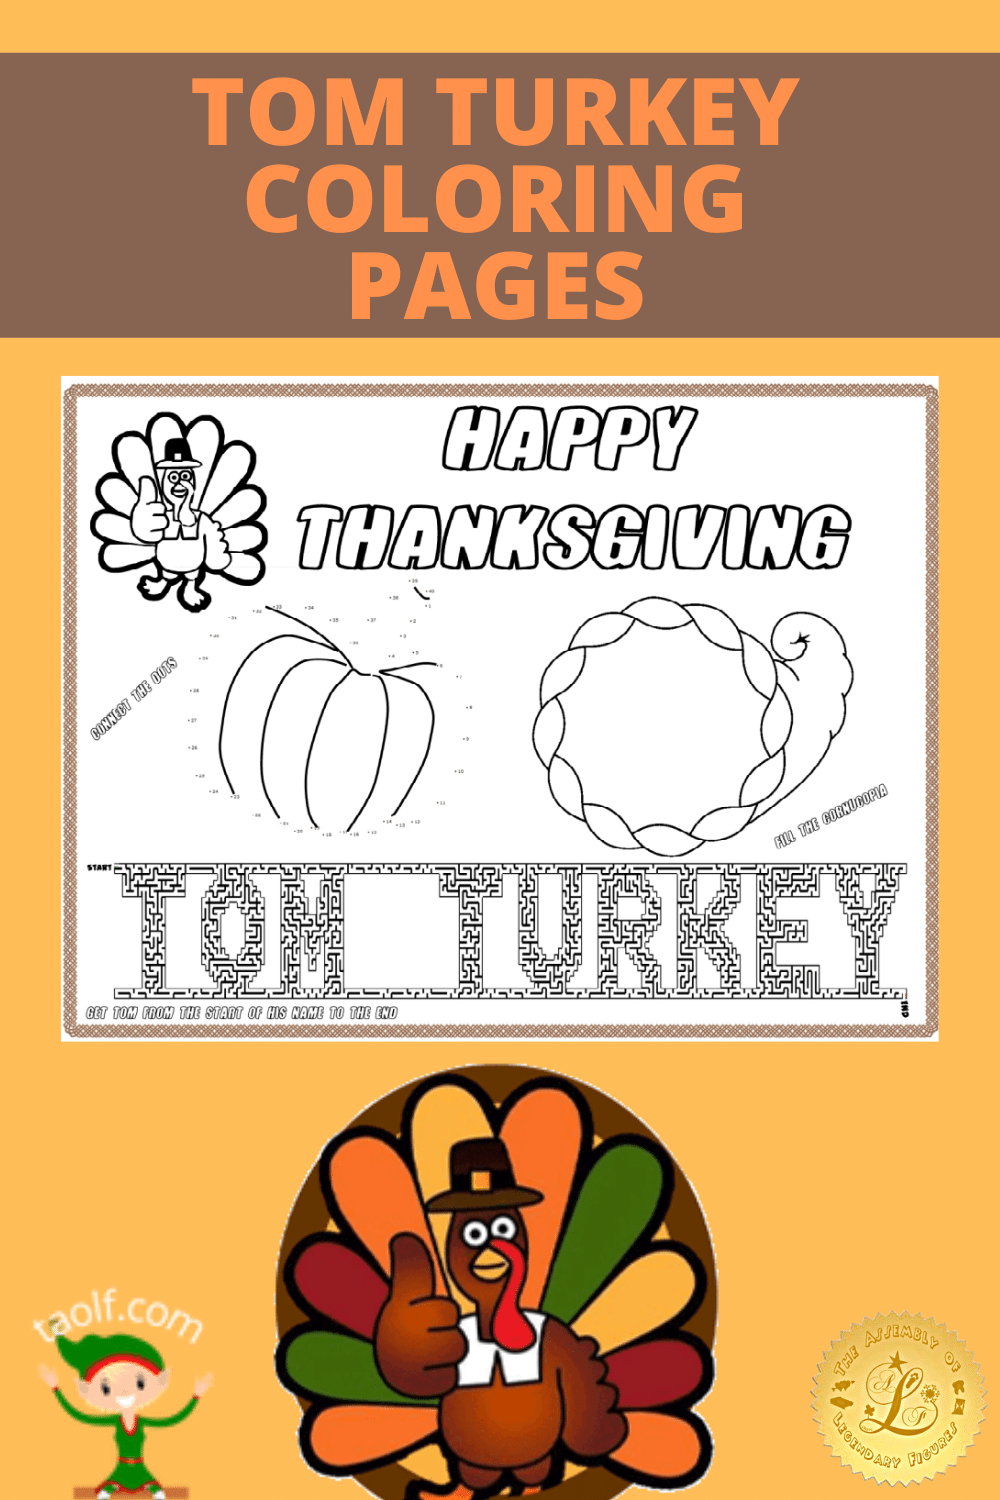 Tom Turkey adds New Coloring Page